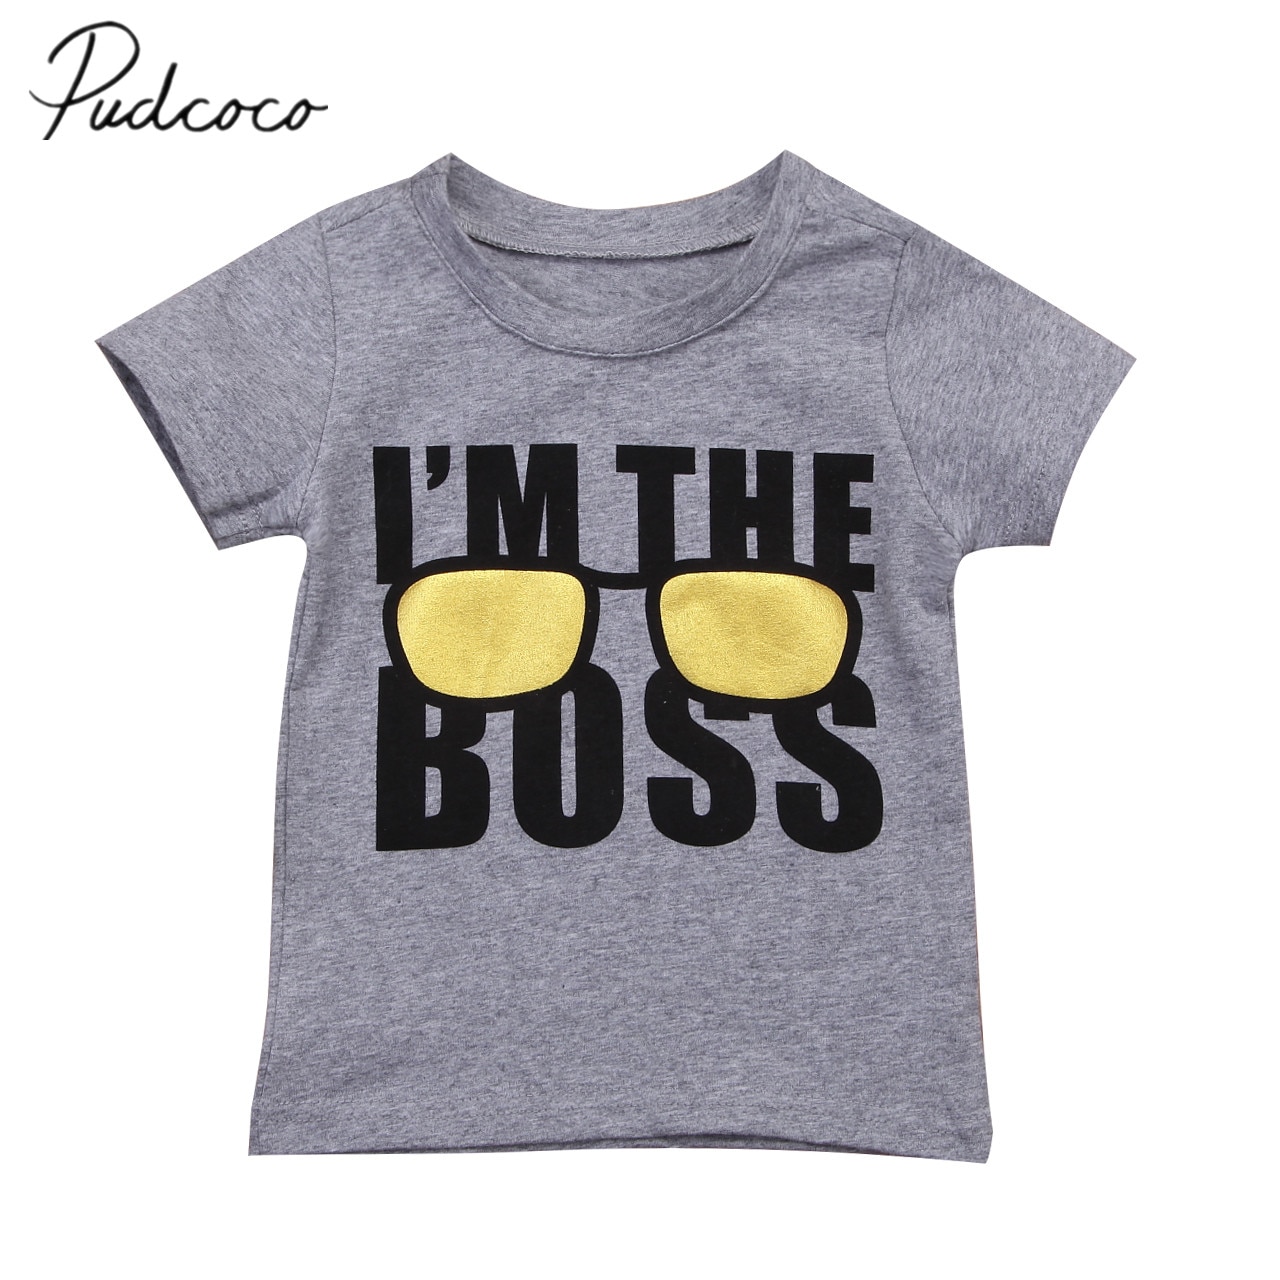 Brand Toddler Infant Child Kids Cotton Tee Boy Short Sleeve Cotton T-shirt Tops Blouse Casual Clothes Tops 1-6T